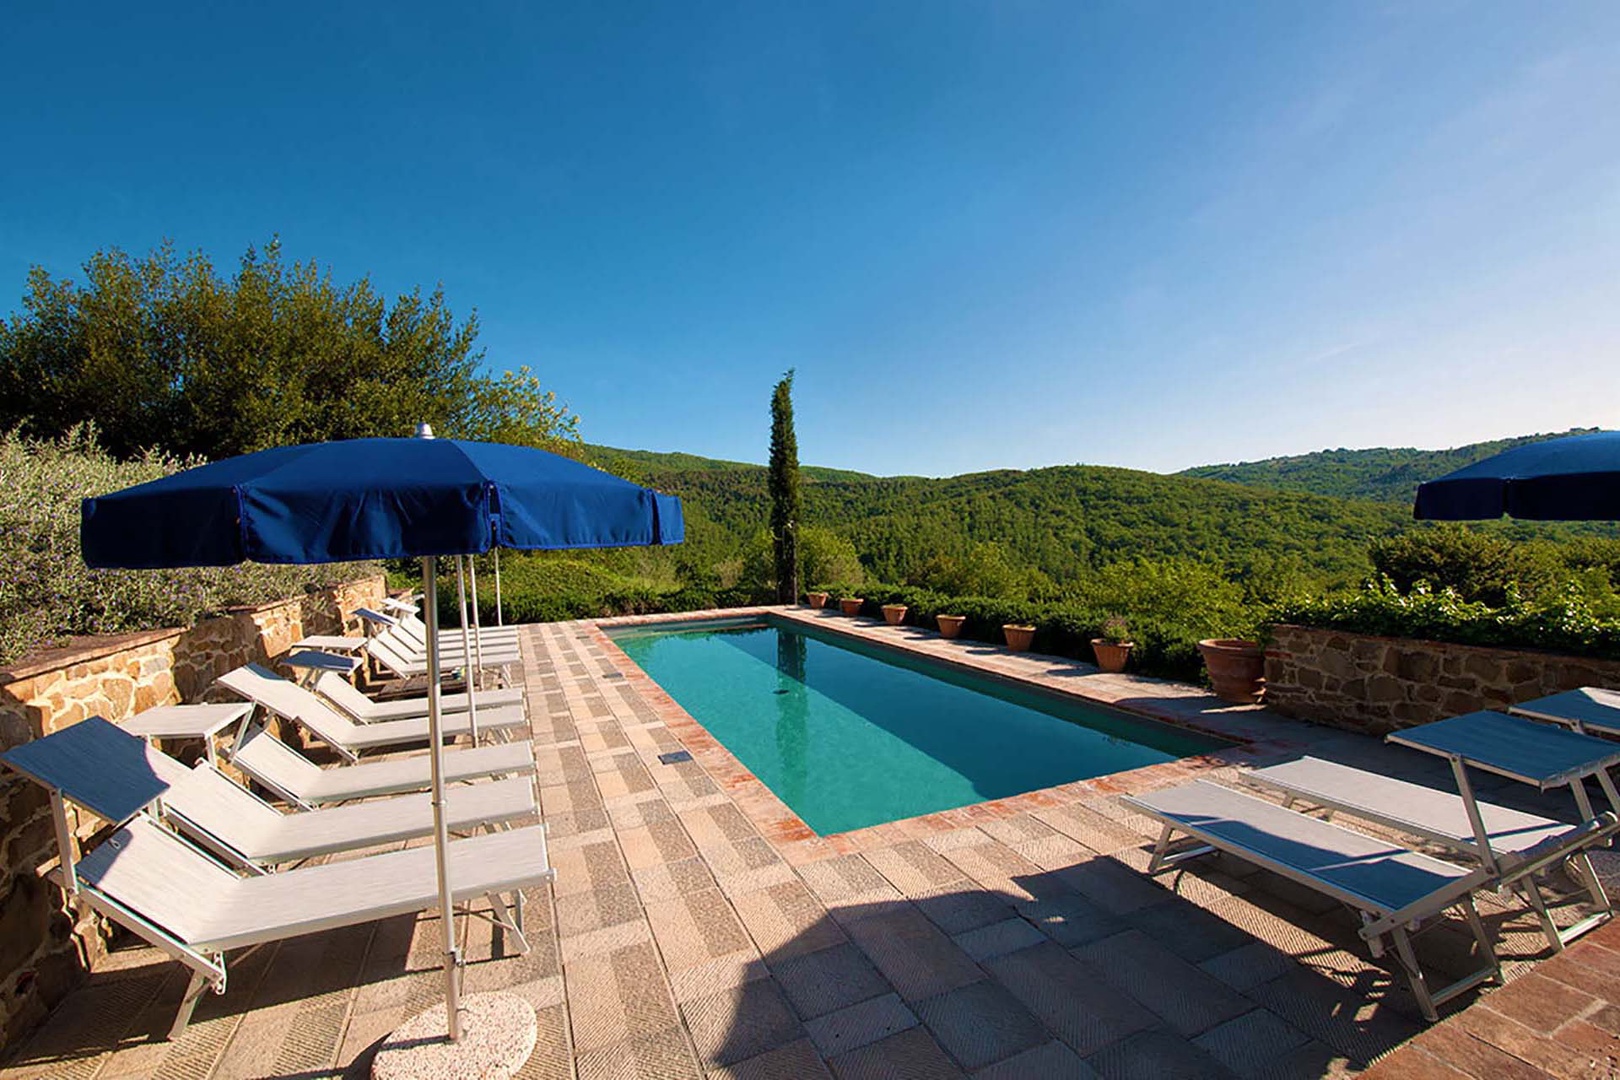 Enjoy the views of the hillside from the pool